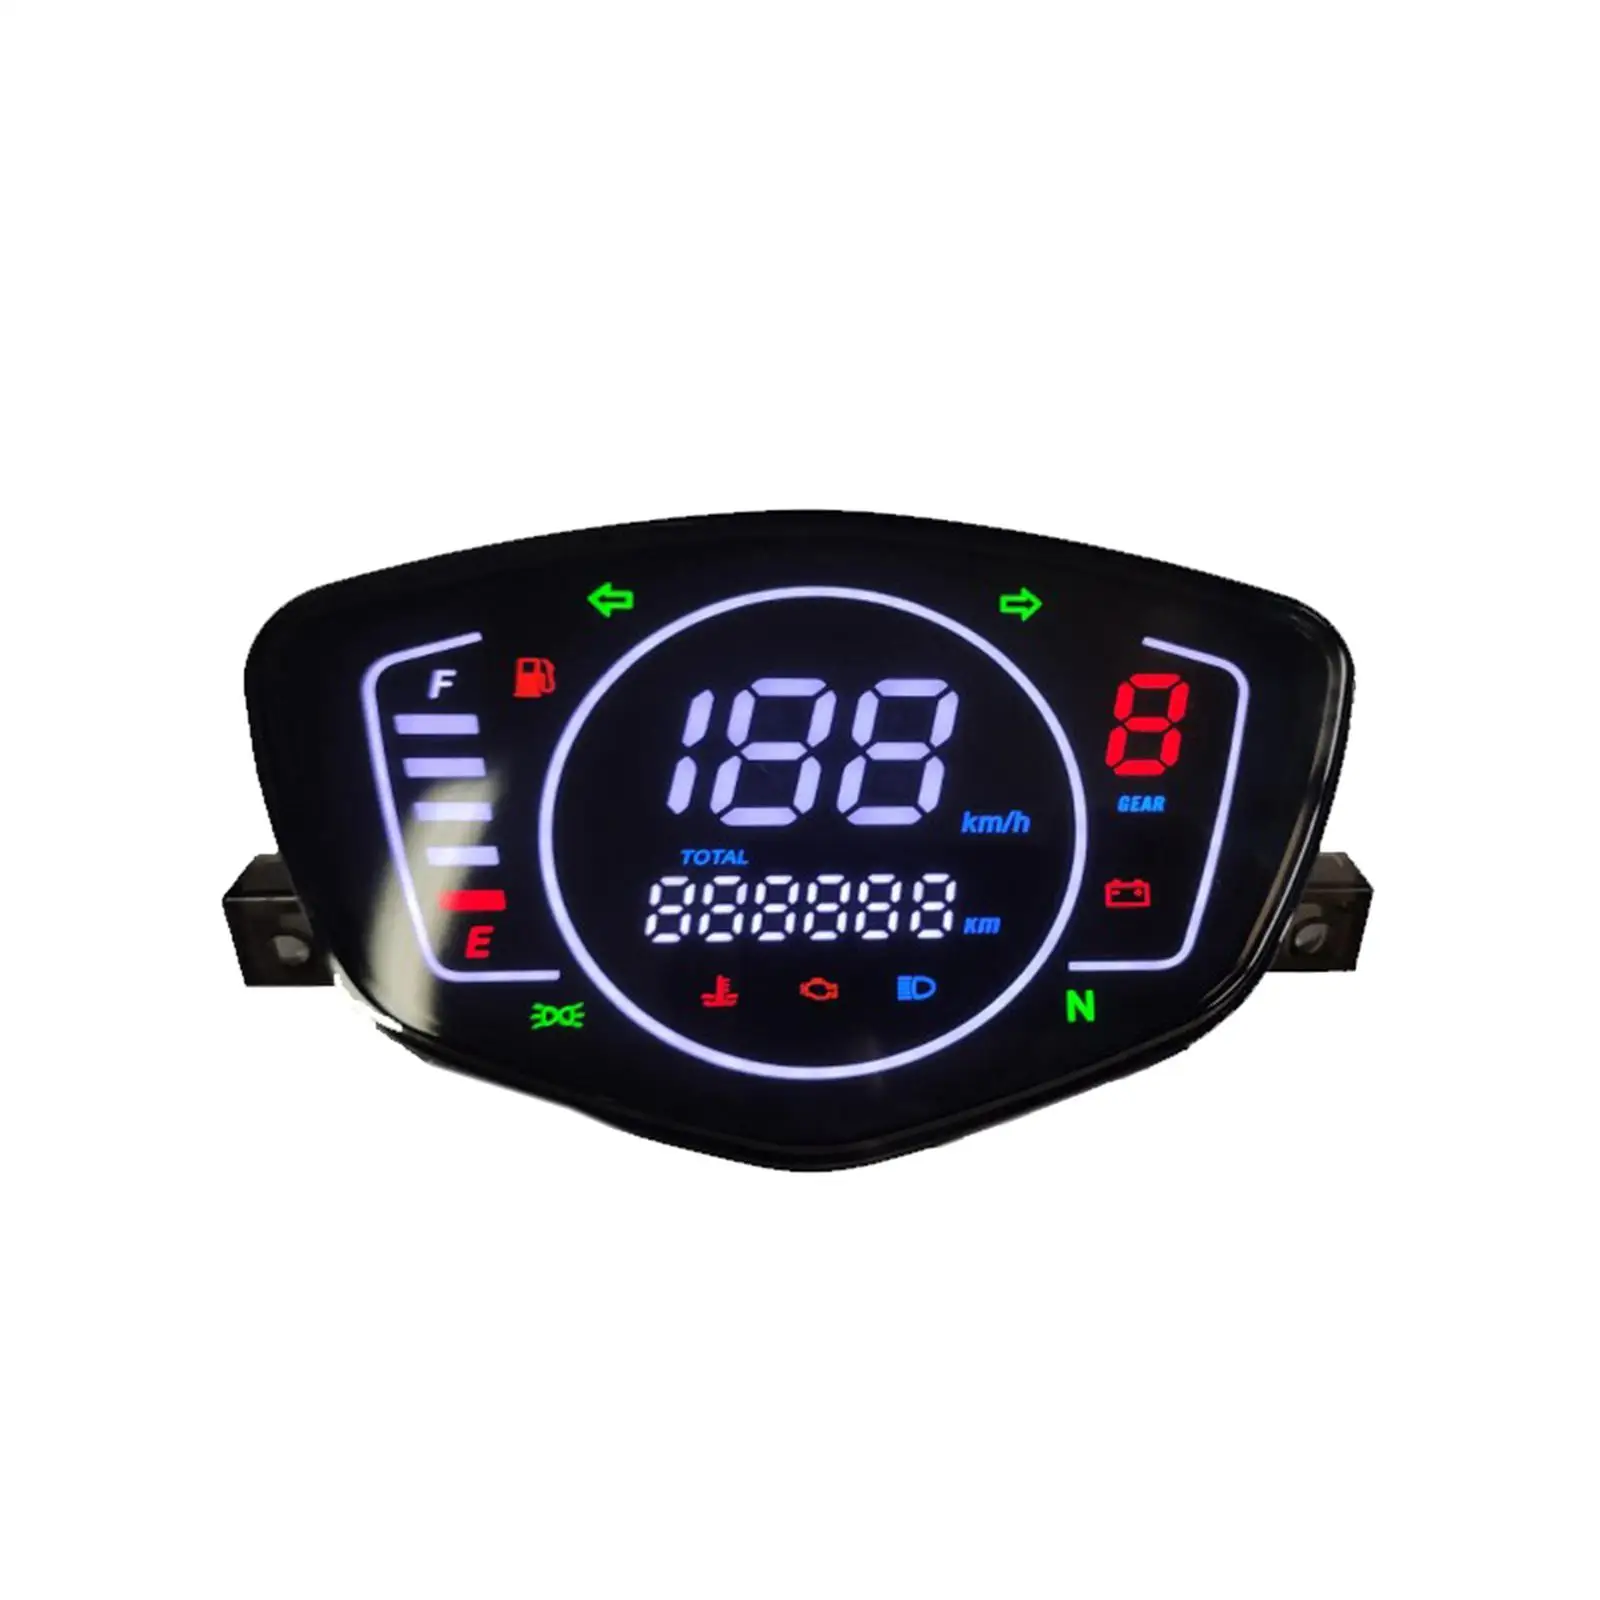 Motorbike LED Digital Speedometer Tachometer Odometer Modification Electronic for Yamaha LC 135 Replace Parts High Quality